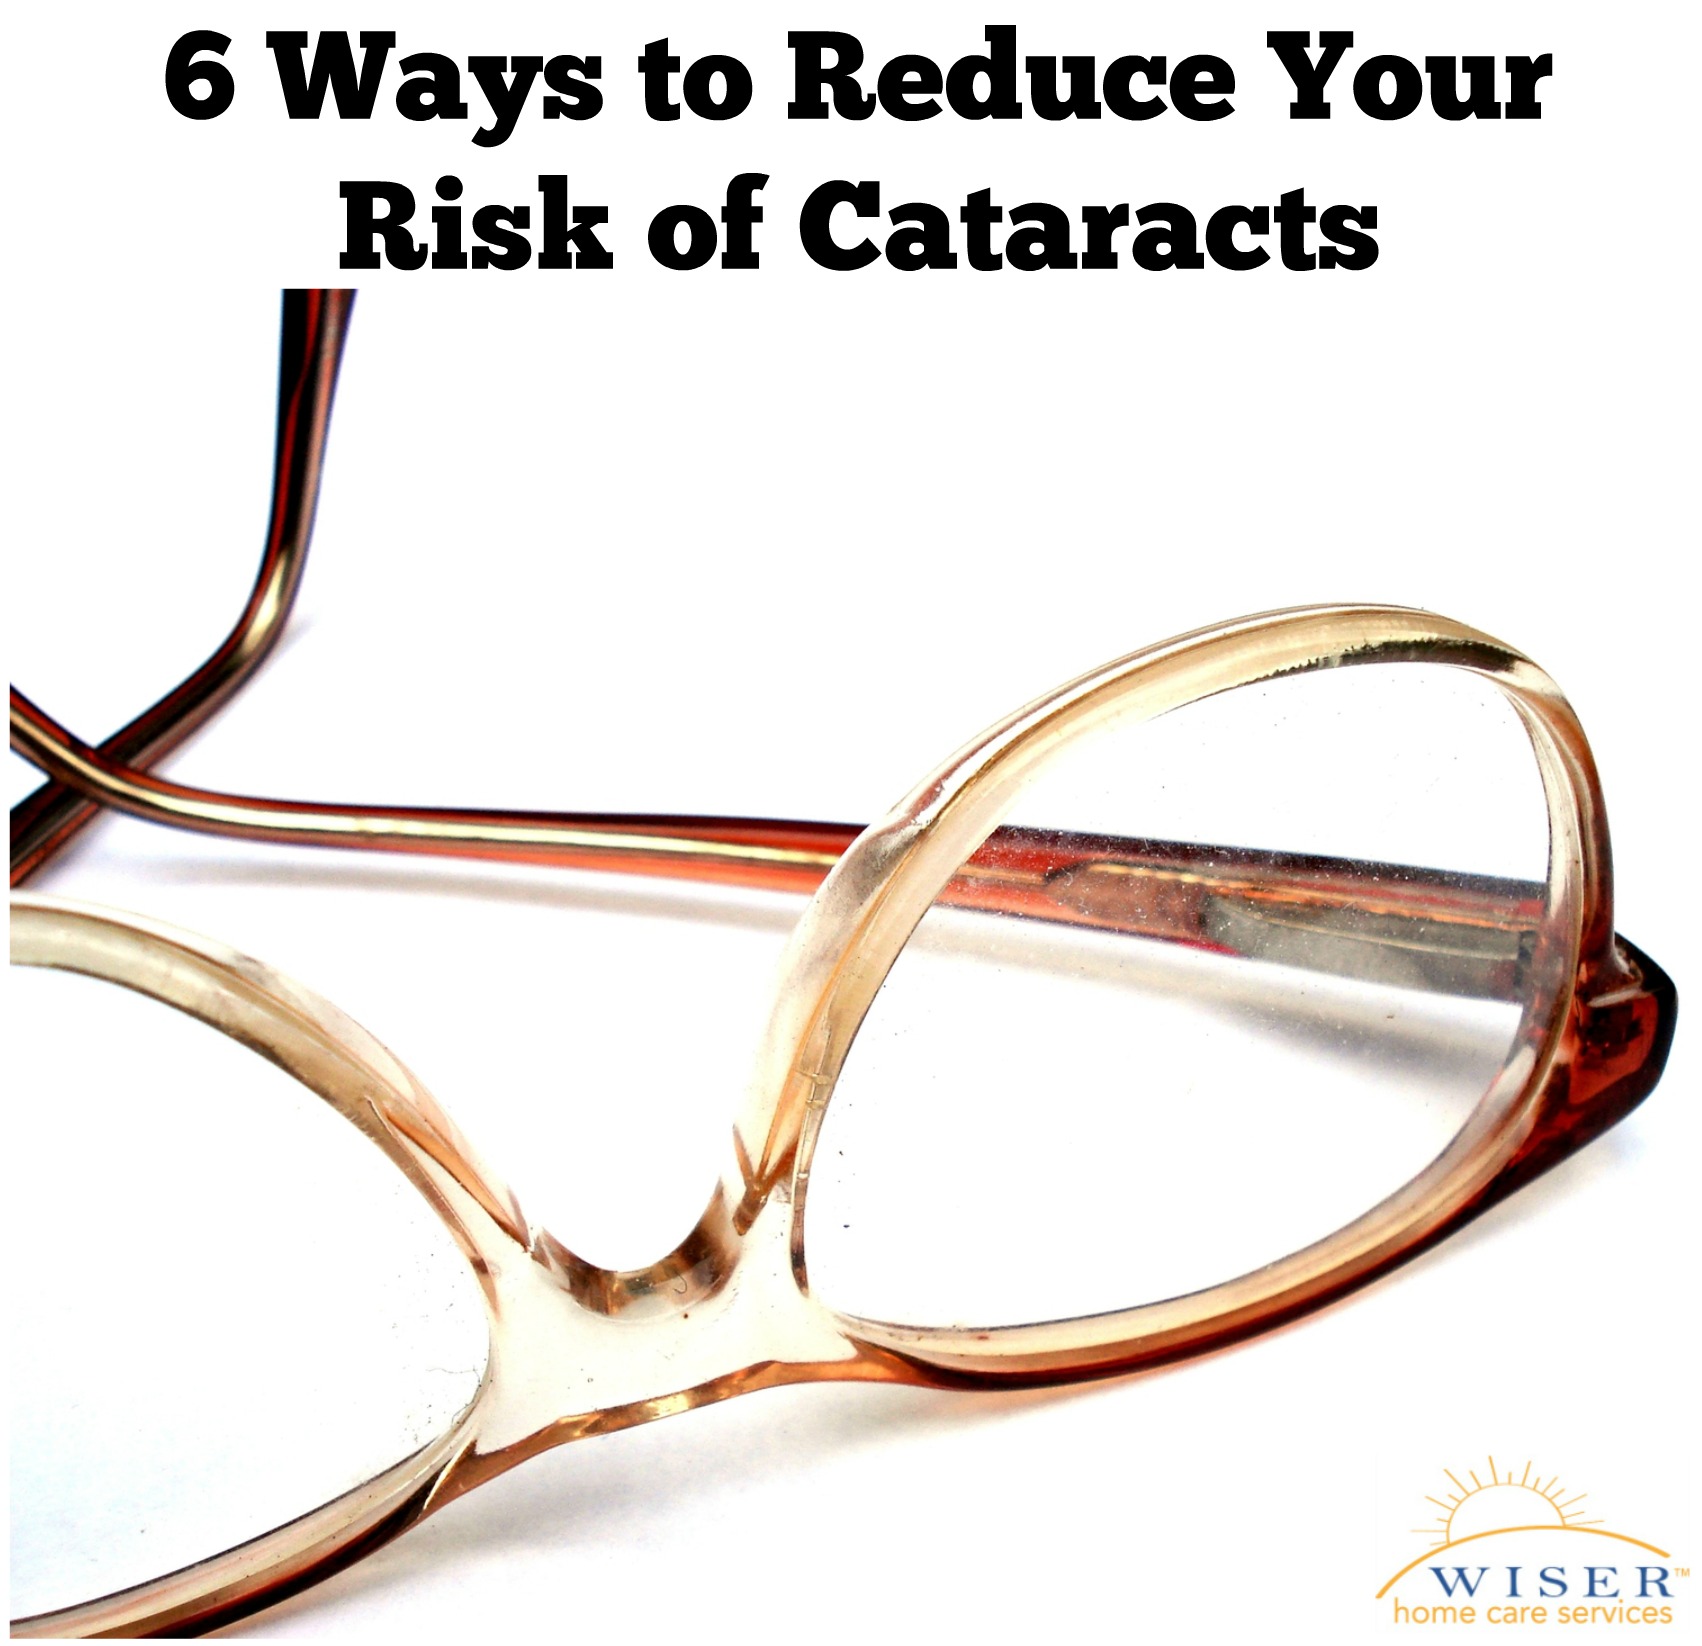 Cataracts are the number one leading cause of blindness worldwide. Knowing what to look for and how to prevent cataracts will greatly lower your risk.